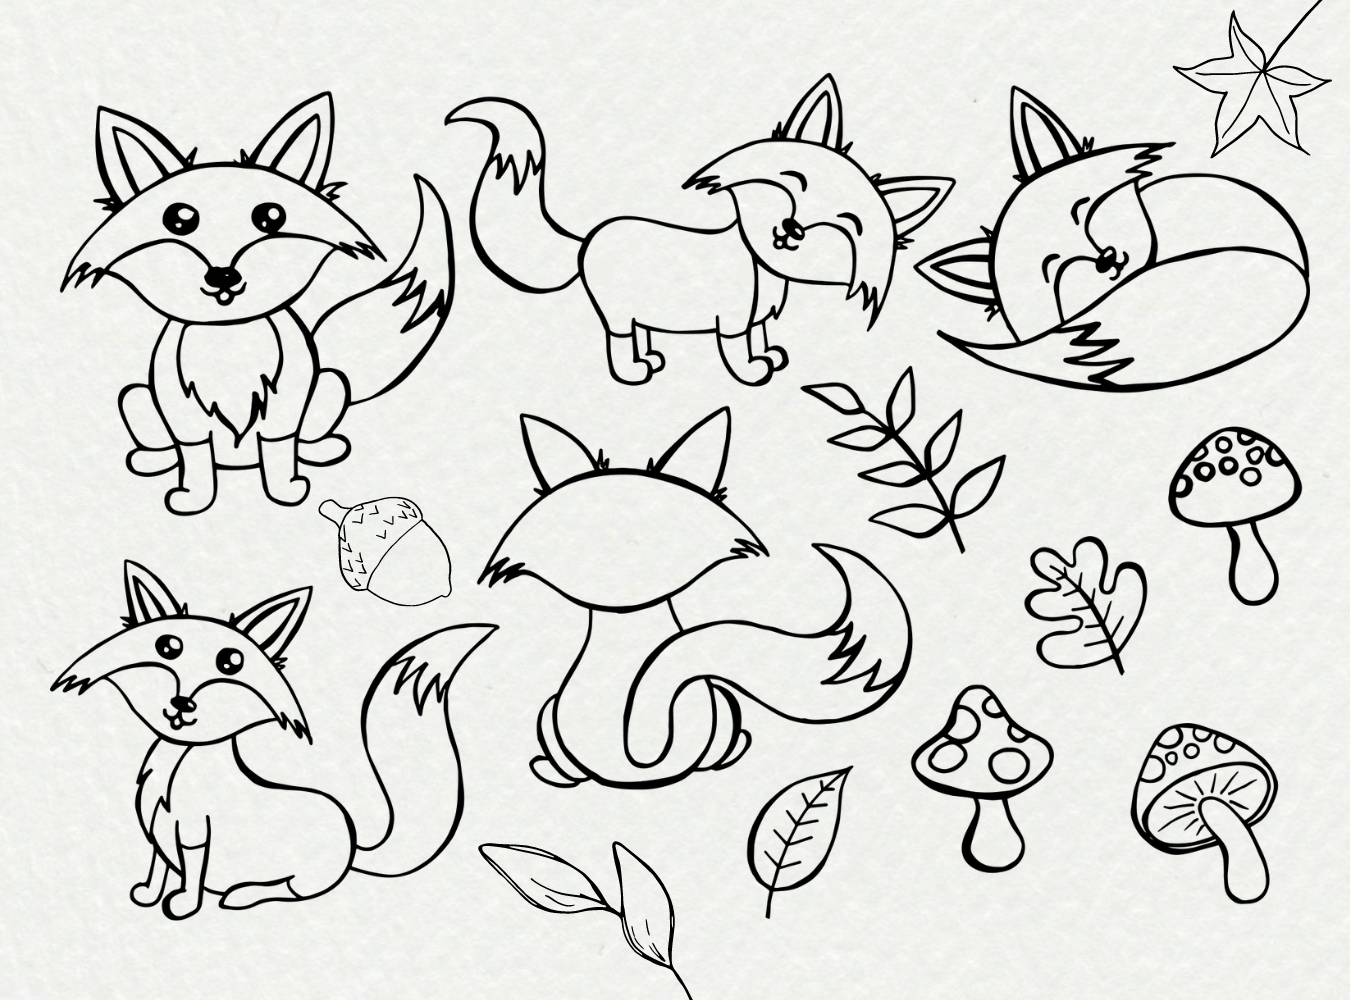 FOREST ANIMALS: CUTE FOX DRAWINGS